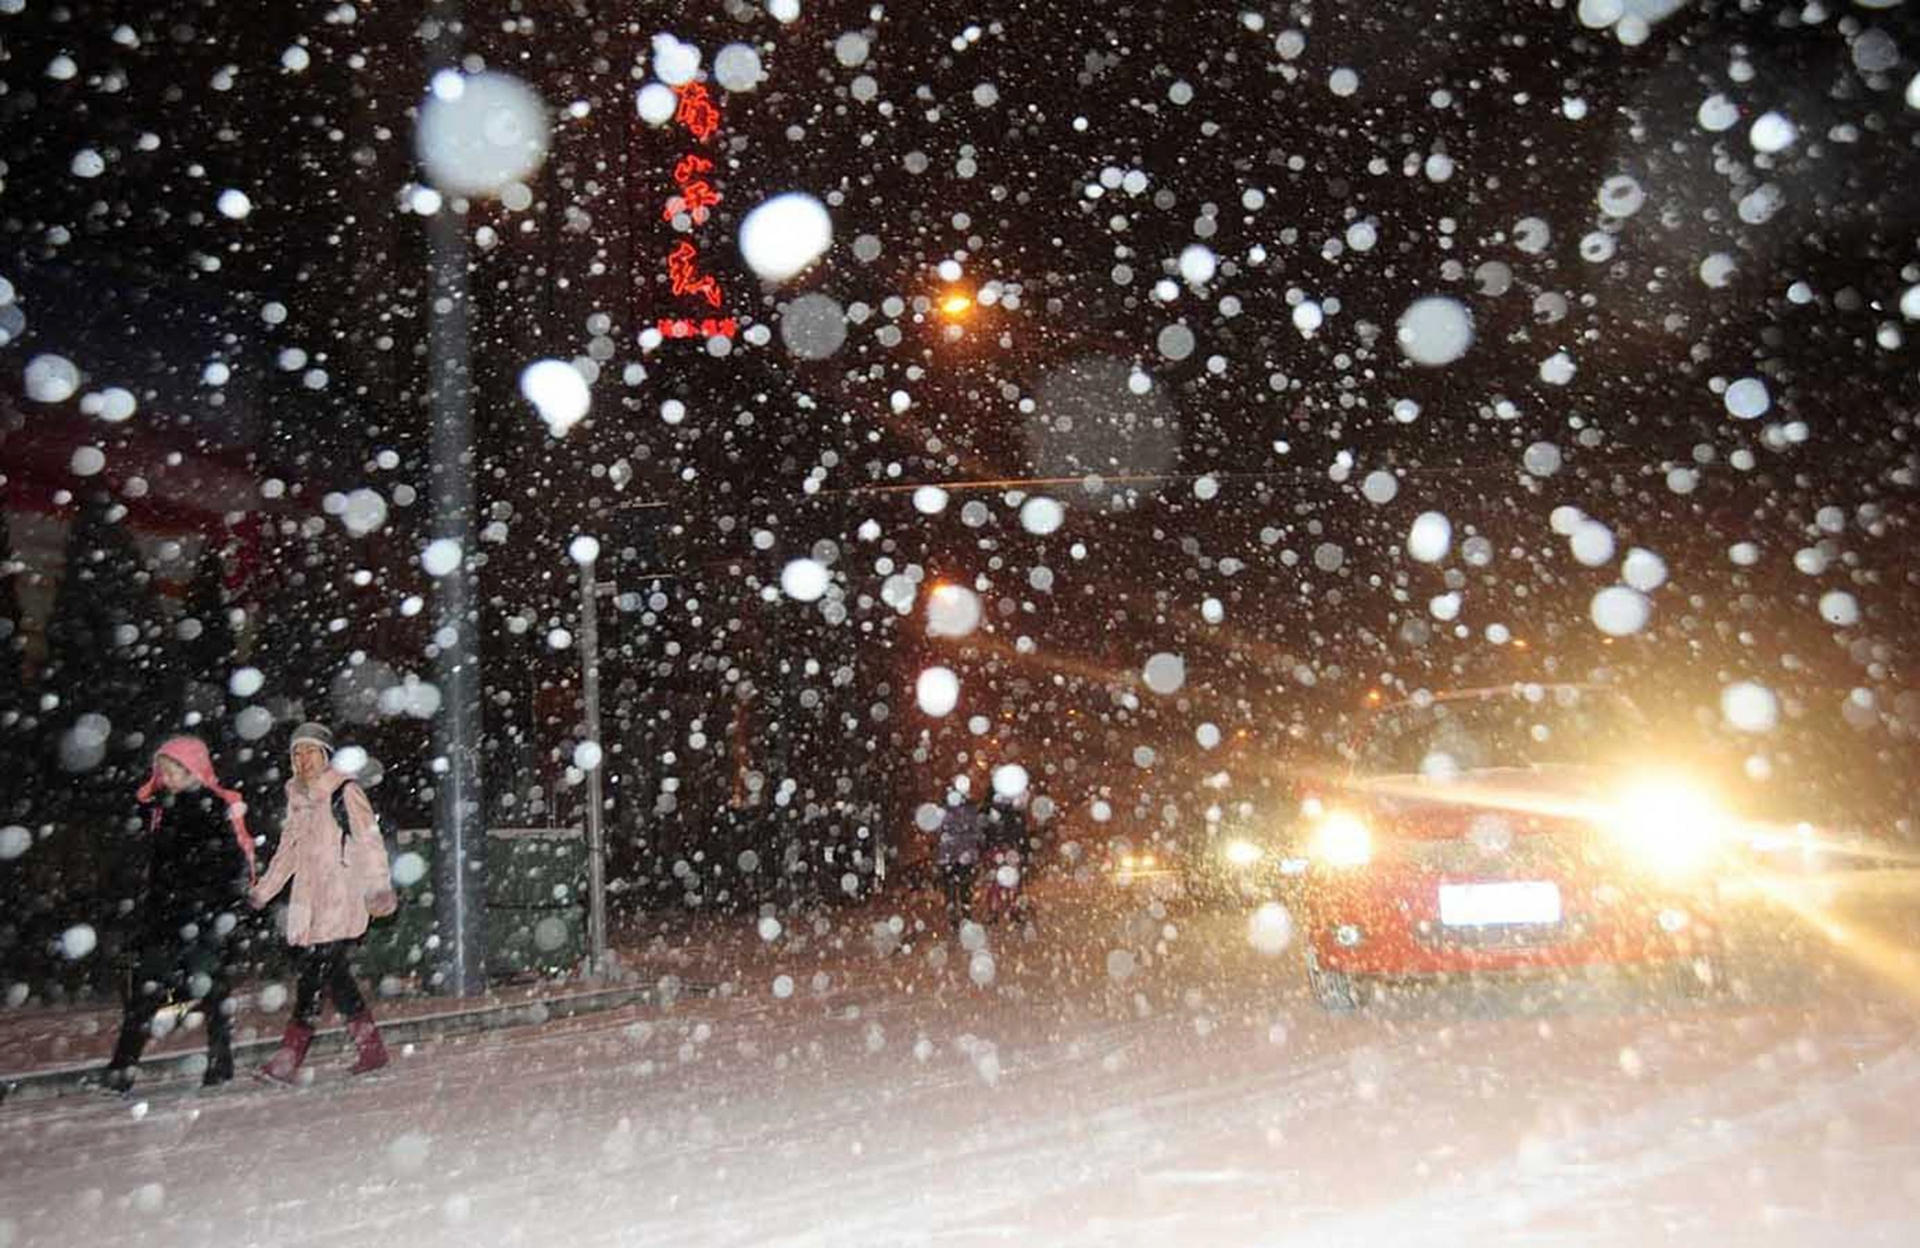 Blizzards hit much of the central and northern mainland, but the capital continued its snow-free winter. Photo: SCMP Pictures